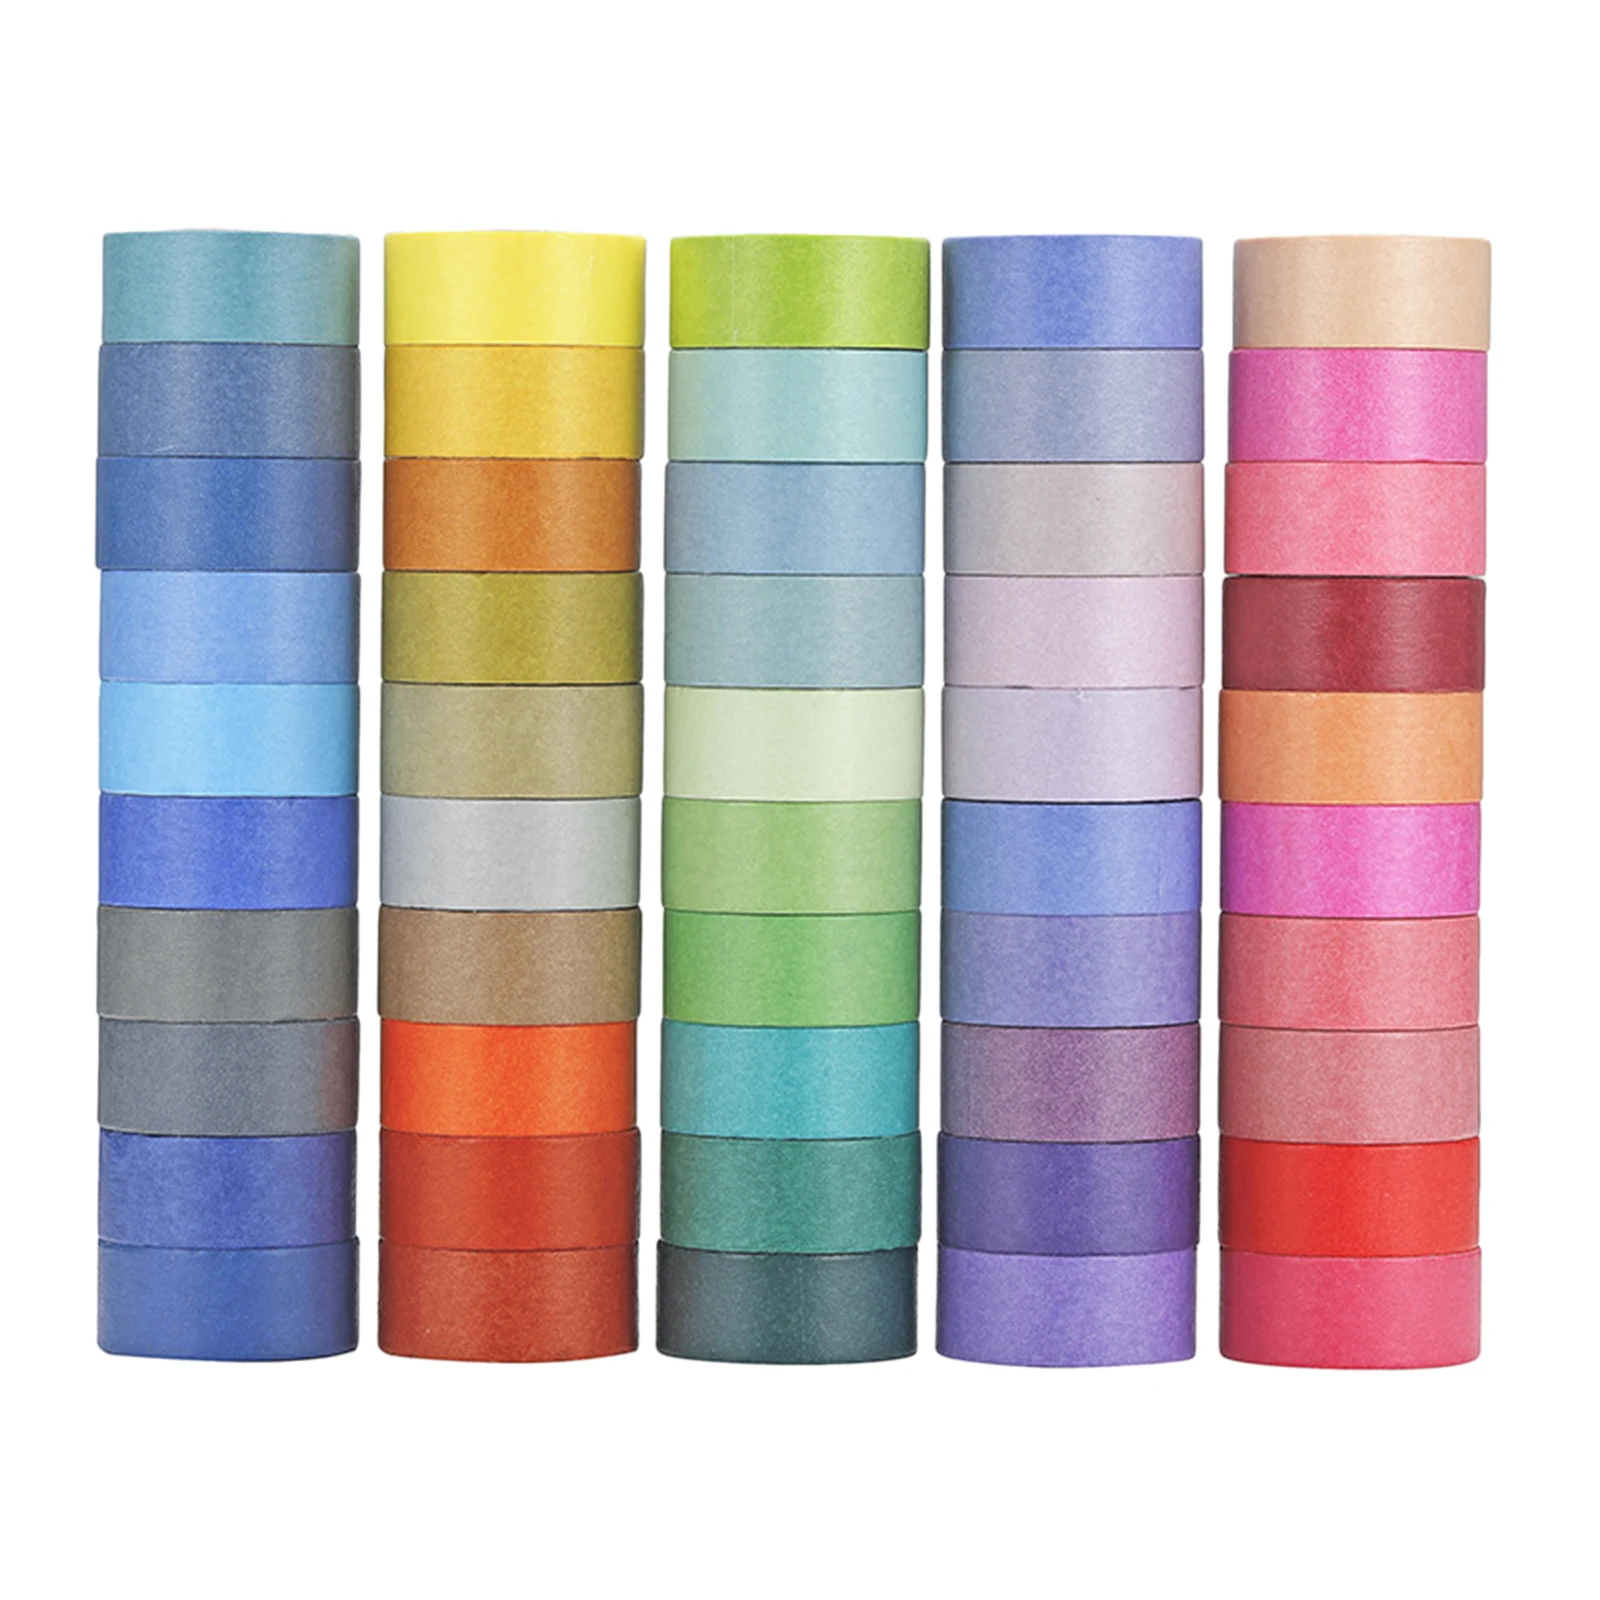 60 Rolls Washi Tape Set Rainbow Colored Masking Tapes Decorative Thin Tapes for Children and Gifts Warpping